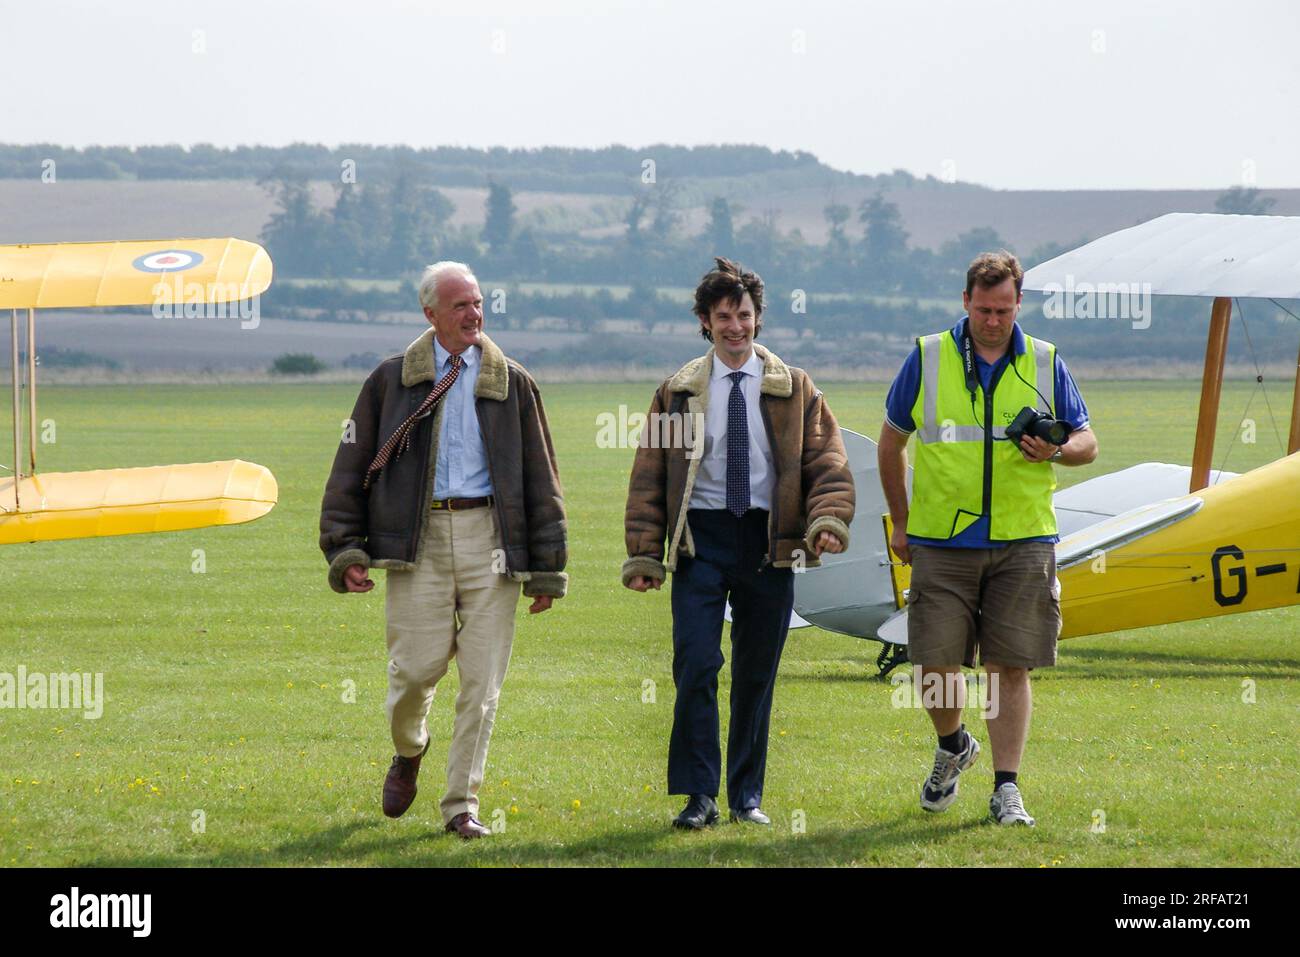 Actor Tom Ward at Duxford, Cambridgeshire, UK, walking back in after a flight in a Classic Wings Tiger Moth biplane. BBC Silent Witness TV star Stock Photo